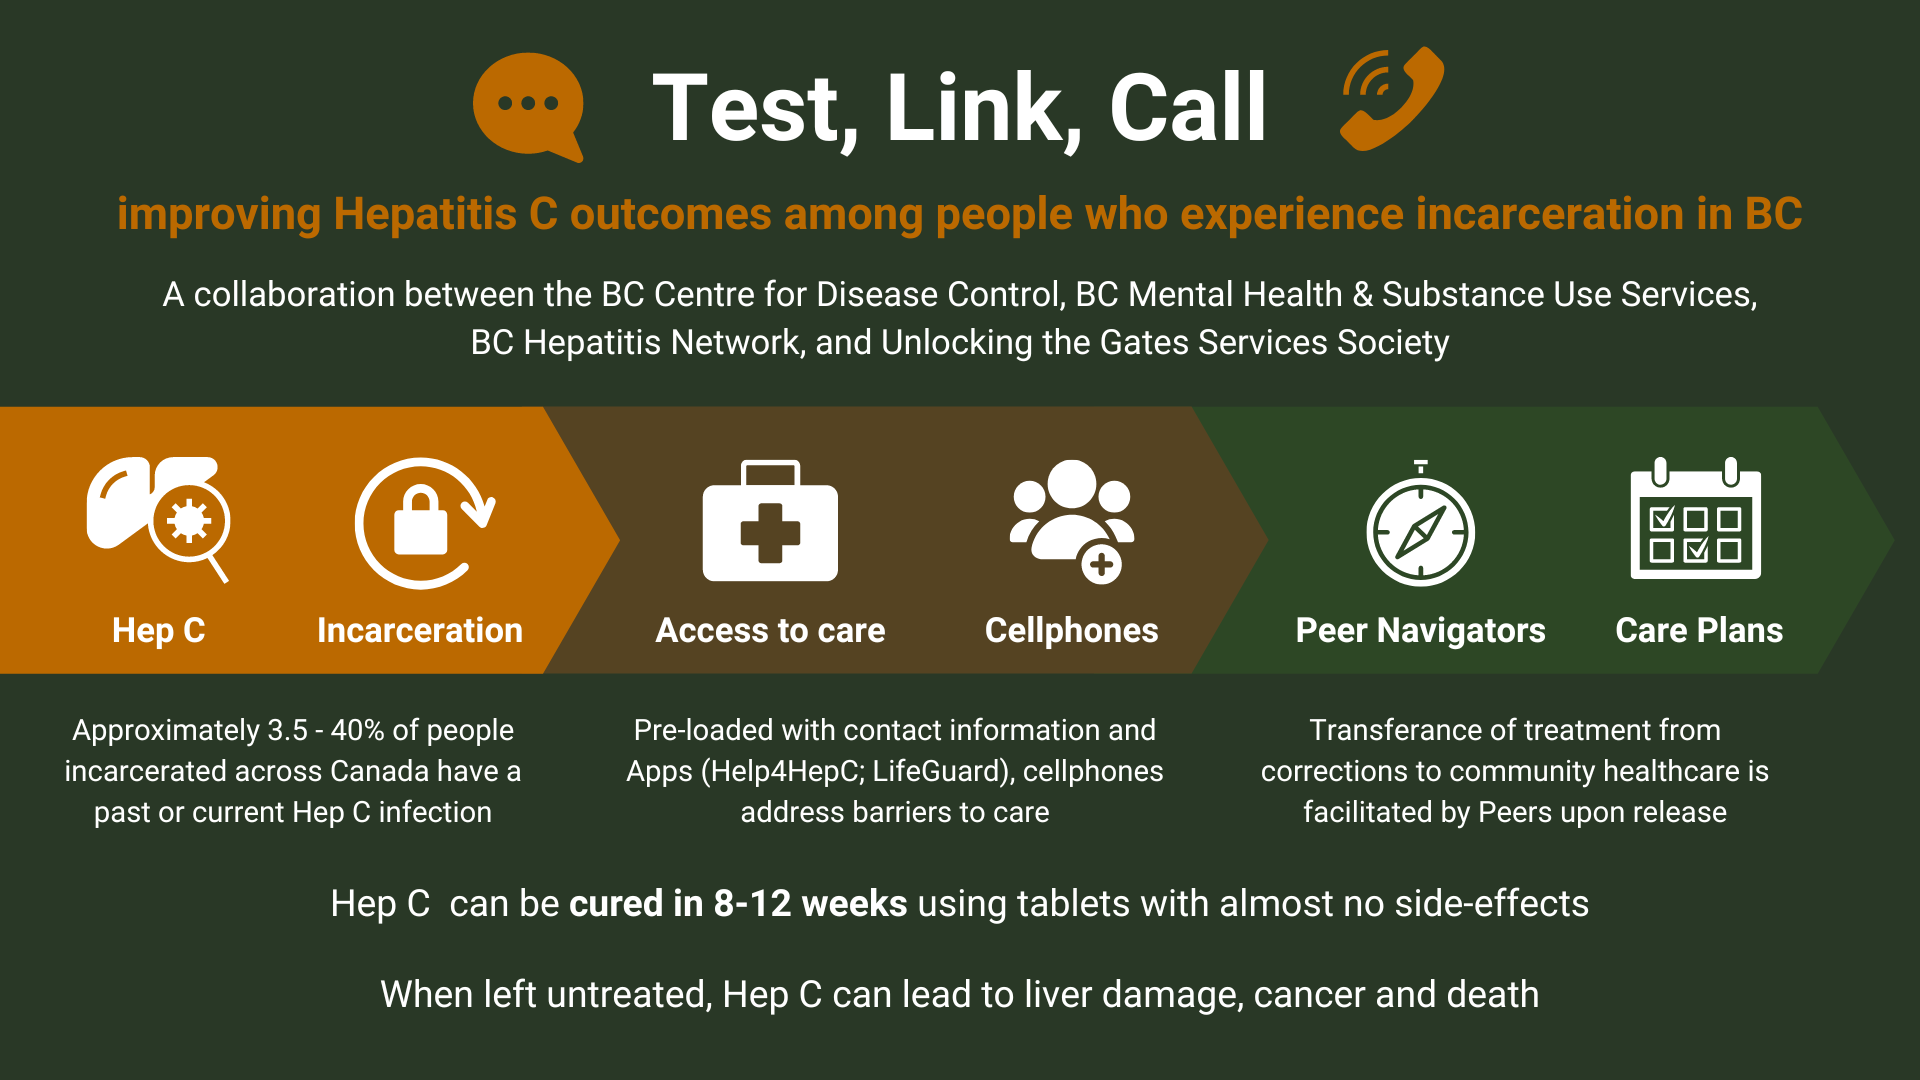 An infographic providing an overview of the Test, Link, Call project. The graphic begins with the project title and followed by “improving Hepatitis C outcome among people who experience incarceration in BC” in orange. The rest of the graphic’s text is in